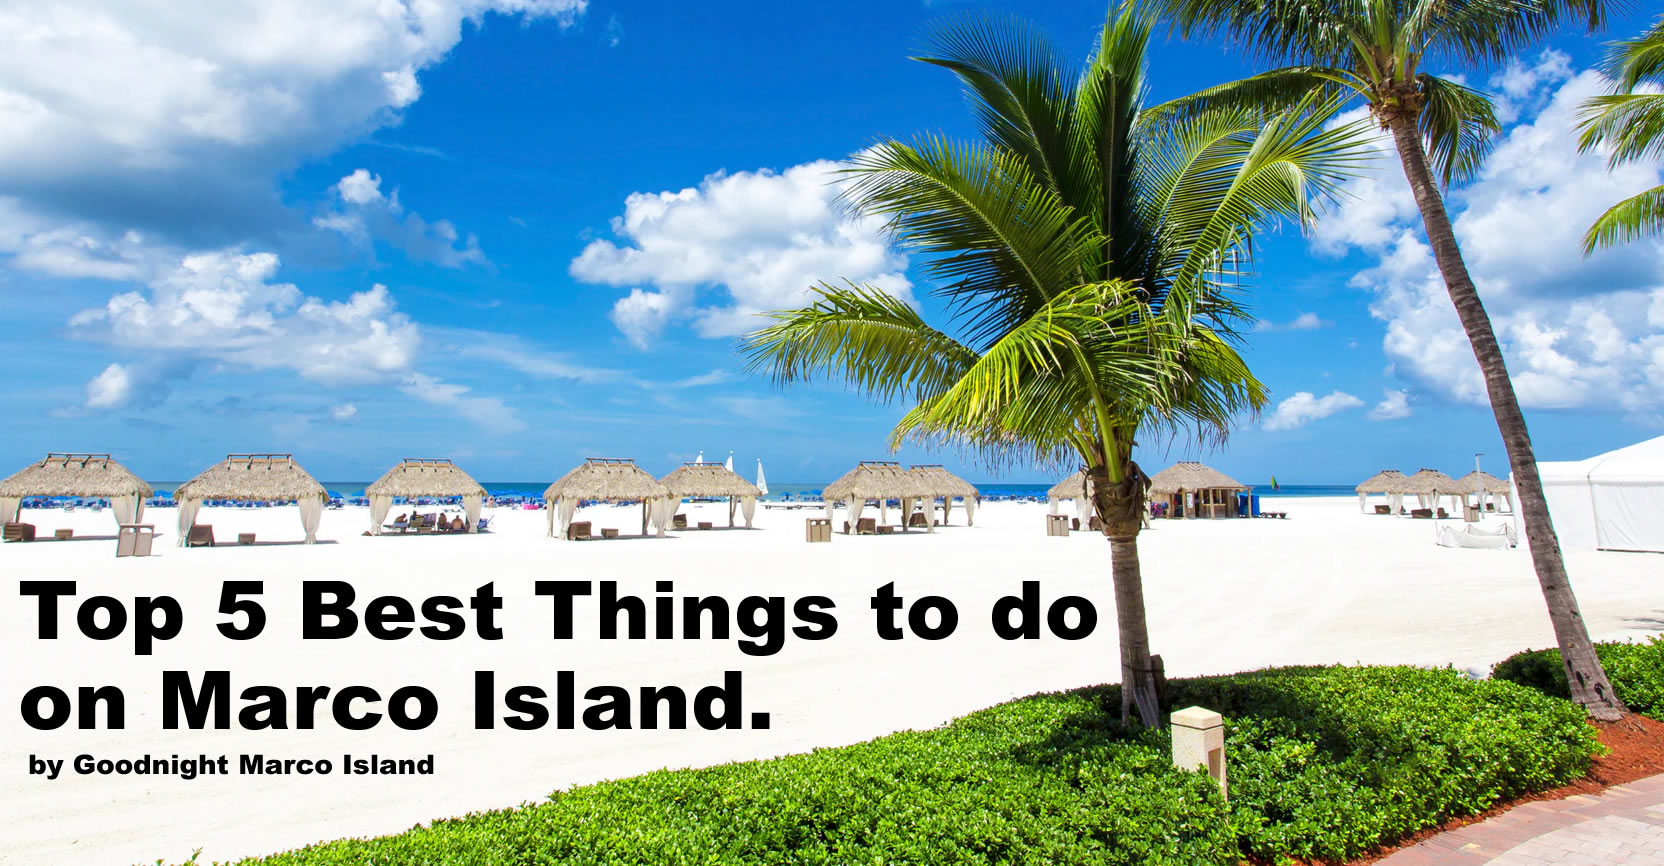 The Top 5 Best Things To Do on Marco Island